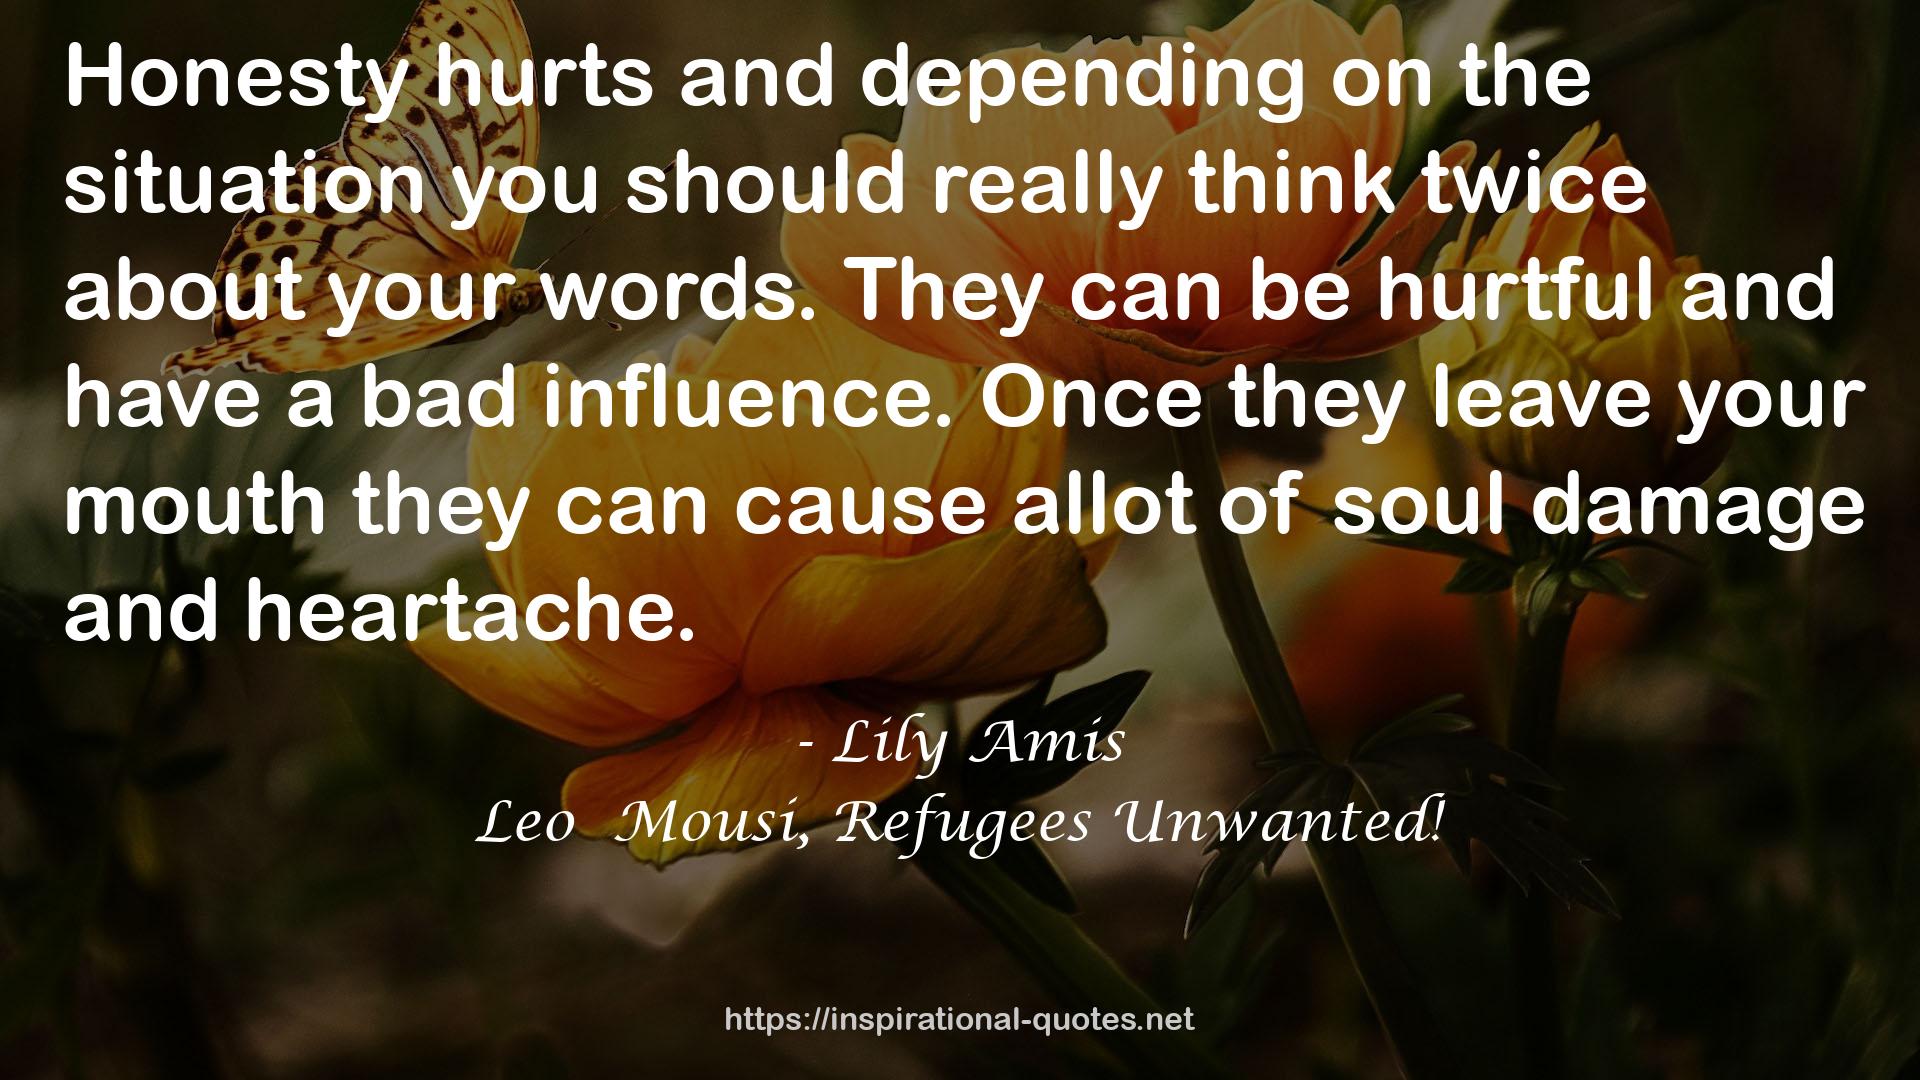 Leo  Mousi, Refugees Unwanted! QUOTES